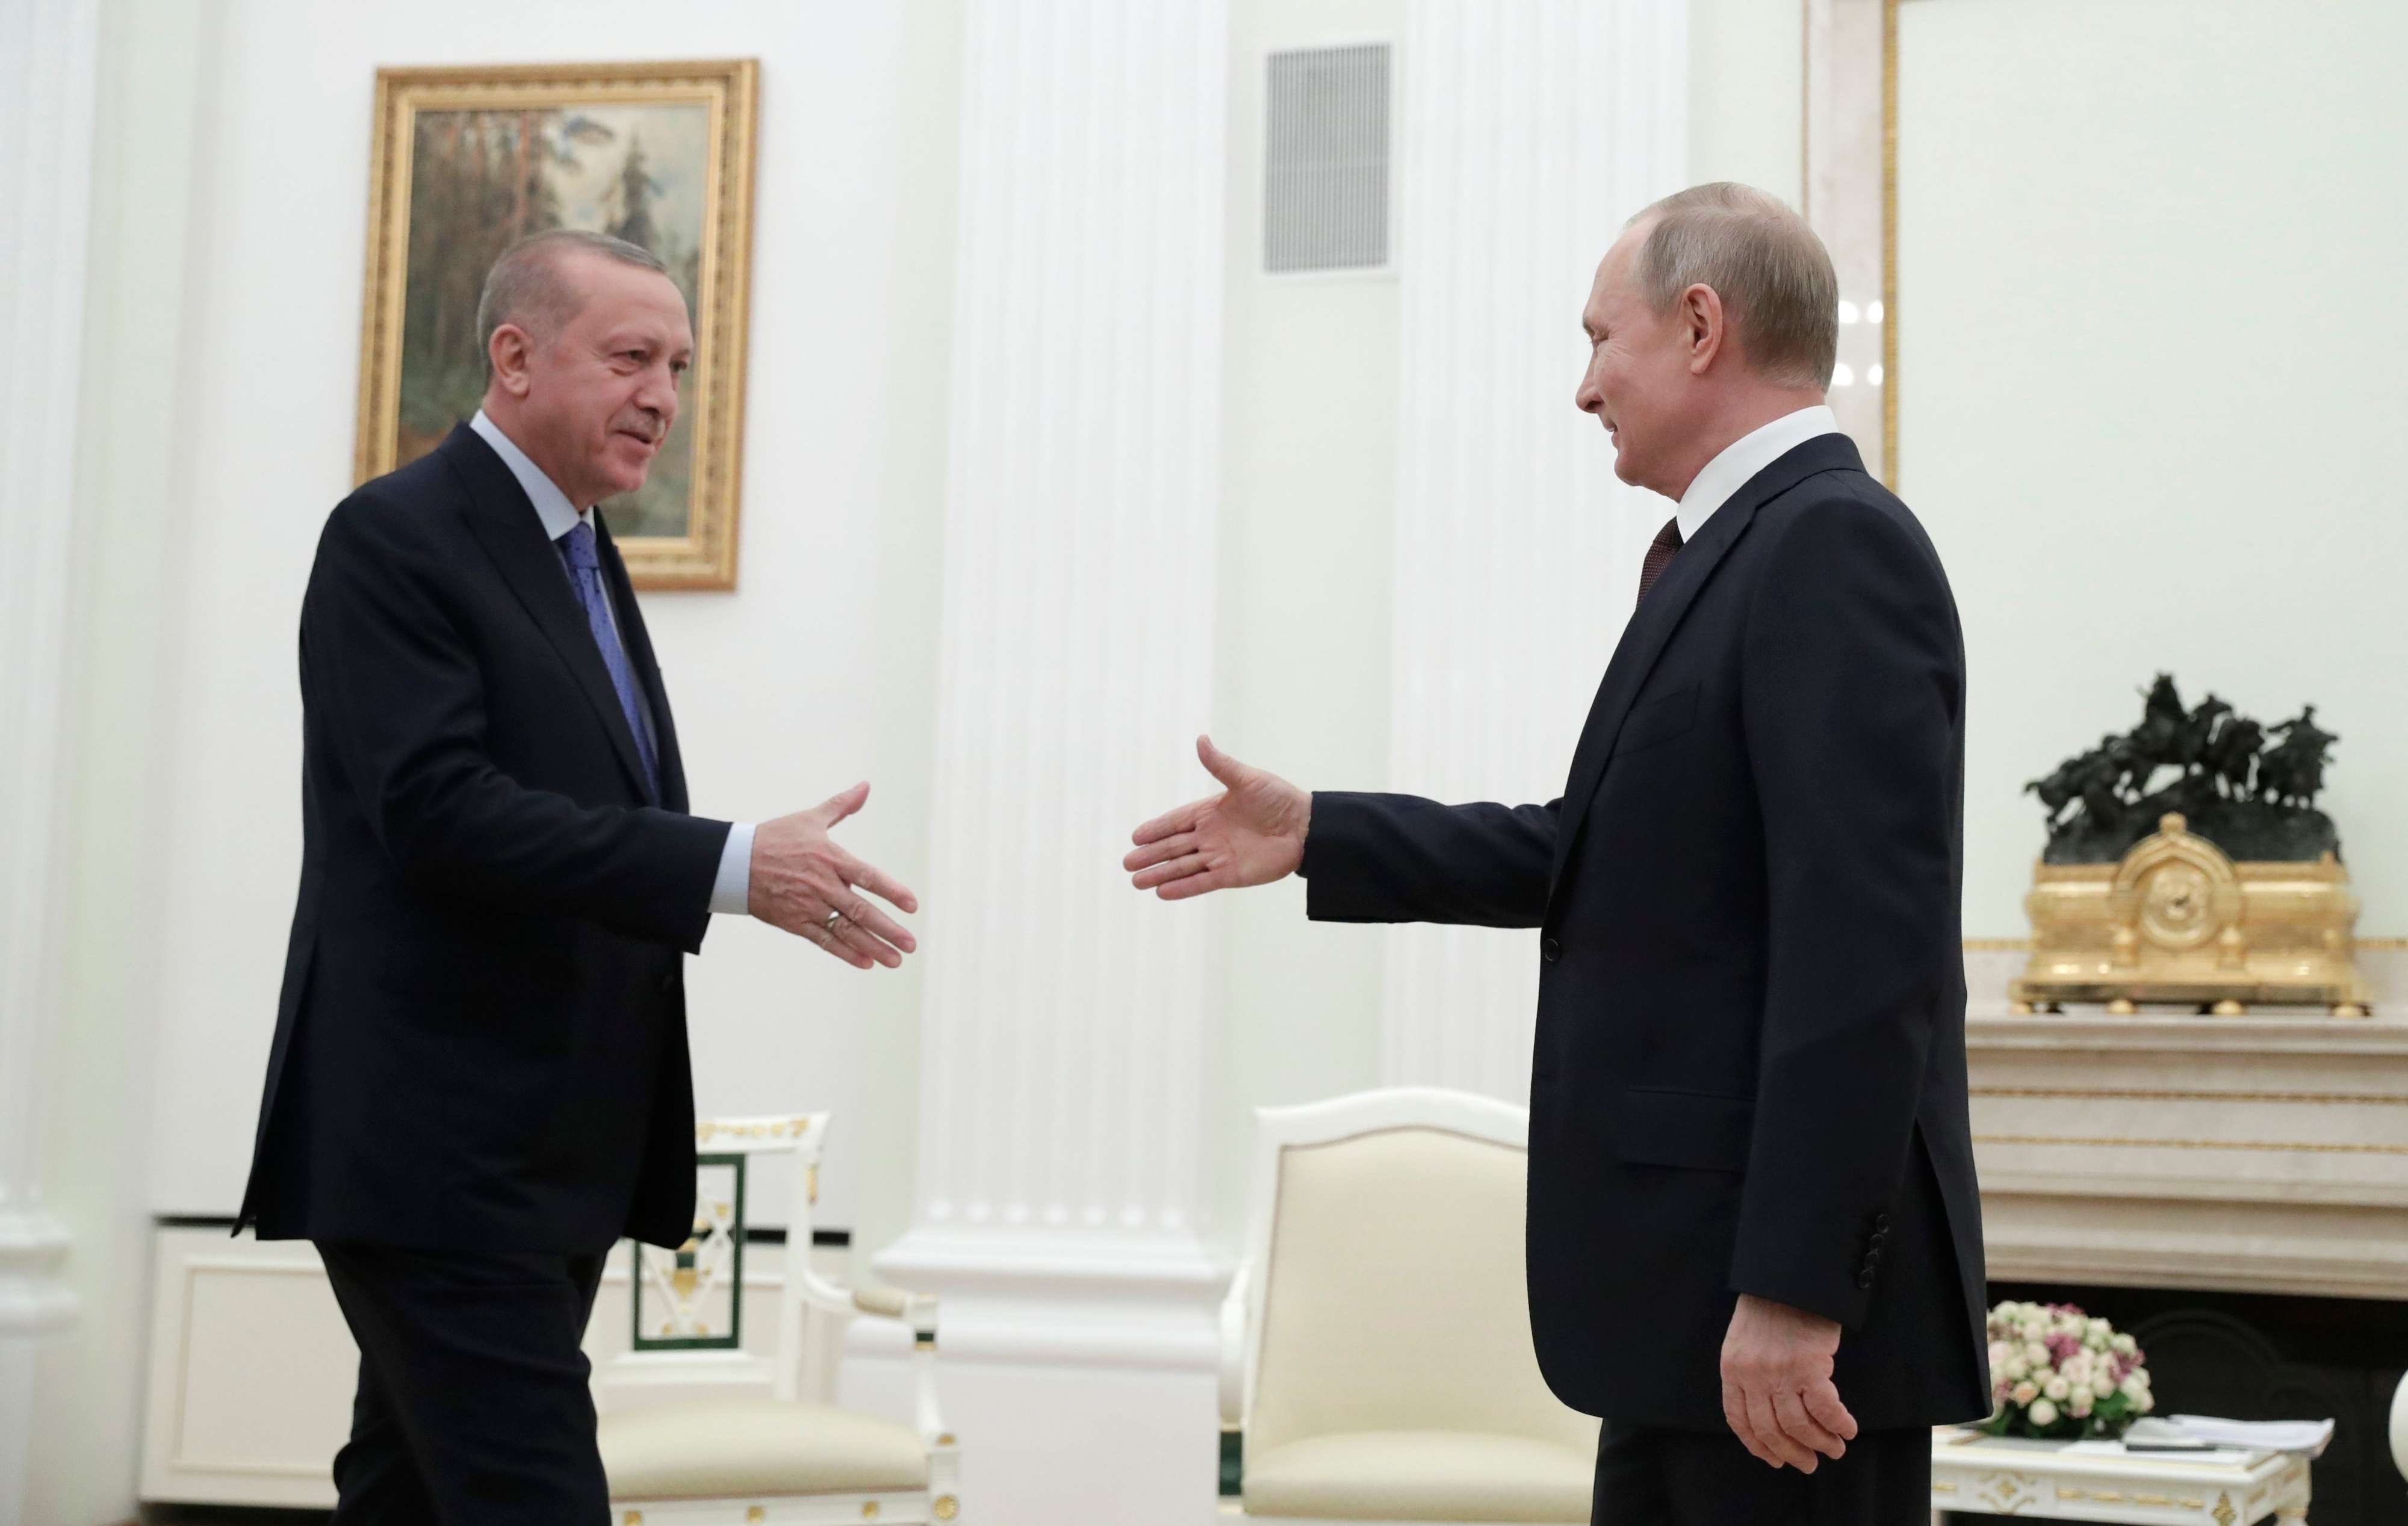 Despite supporting opposing sides in the war, Russia and Turkey have worked to try to resolve the nine-year conflict and avoid direct confrontation